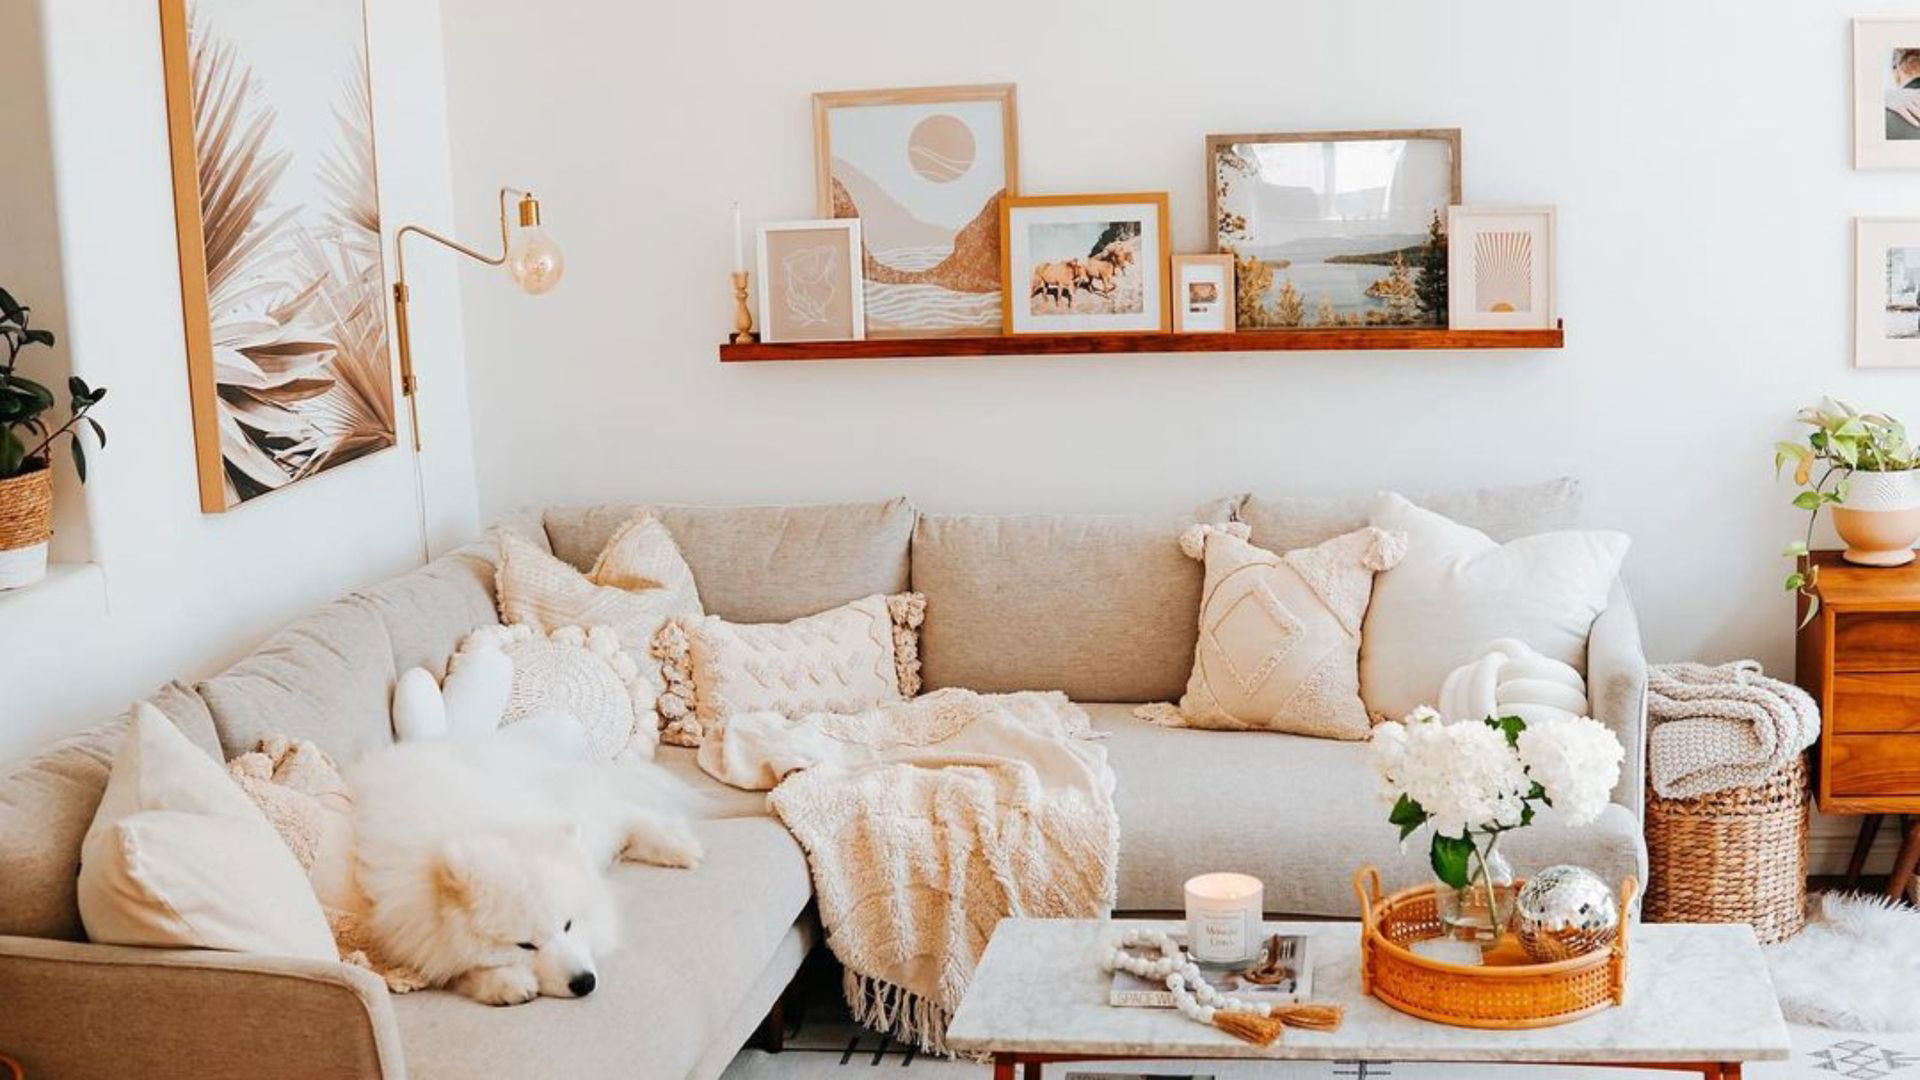 How do I decorate a small space on a budget? Design experts explain